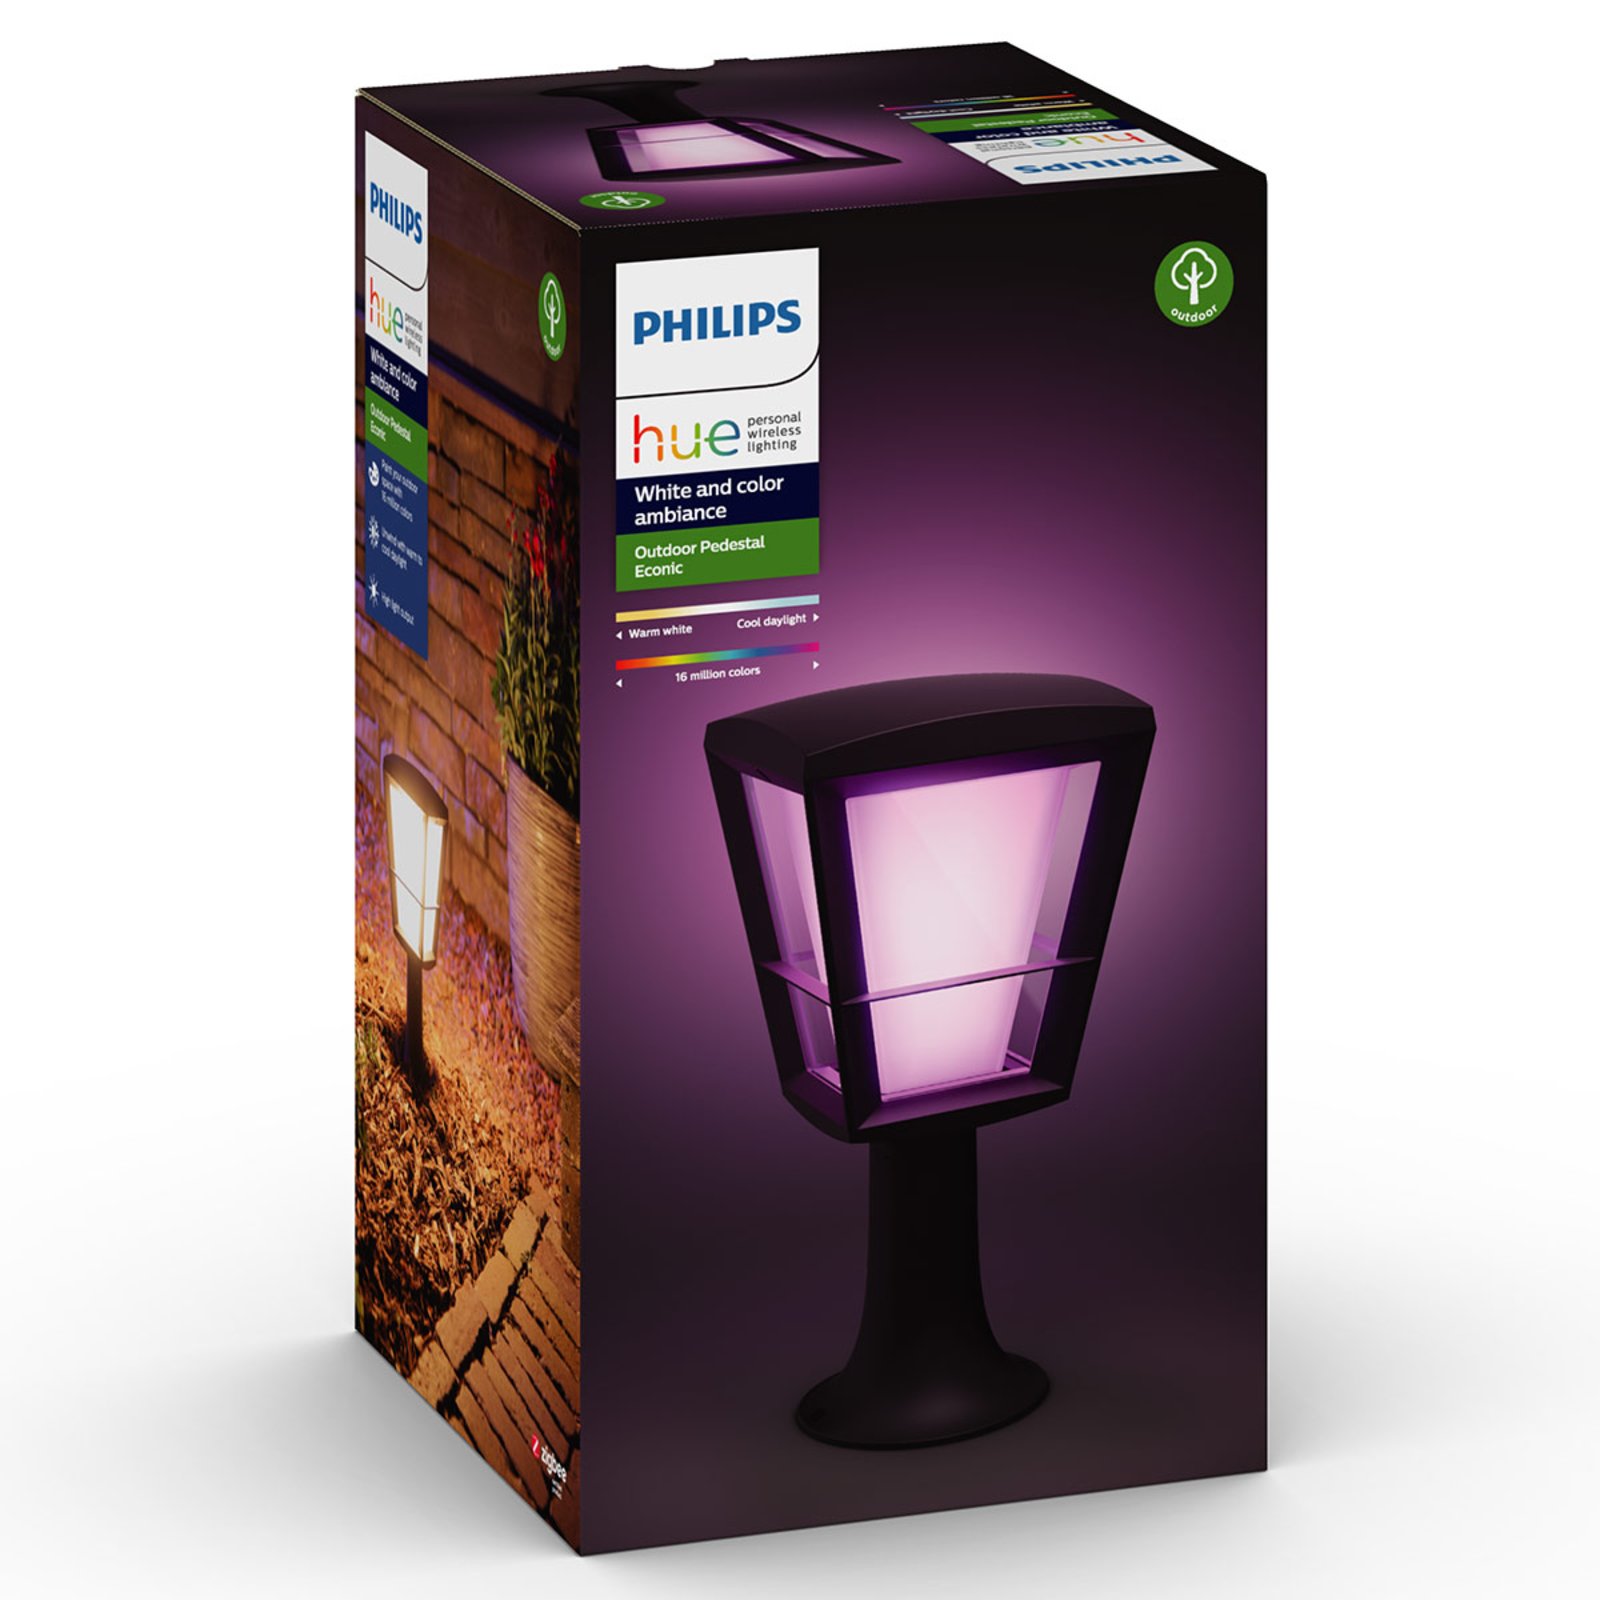 Philips Hue White+Color Econic potelet LED